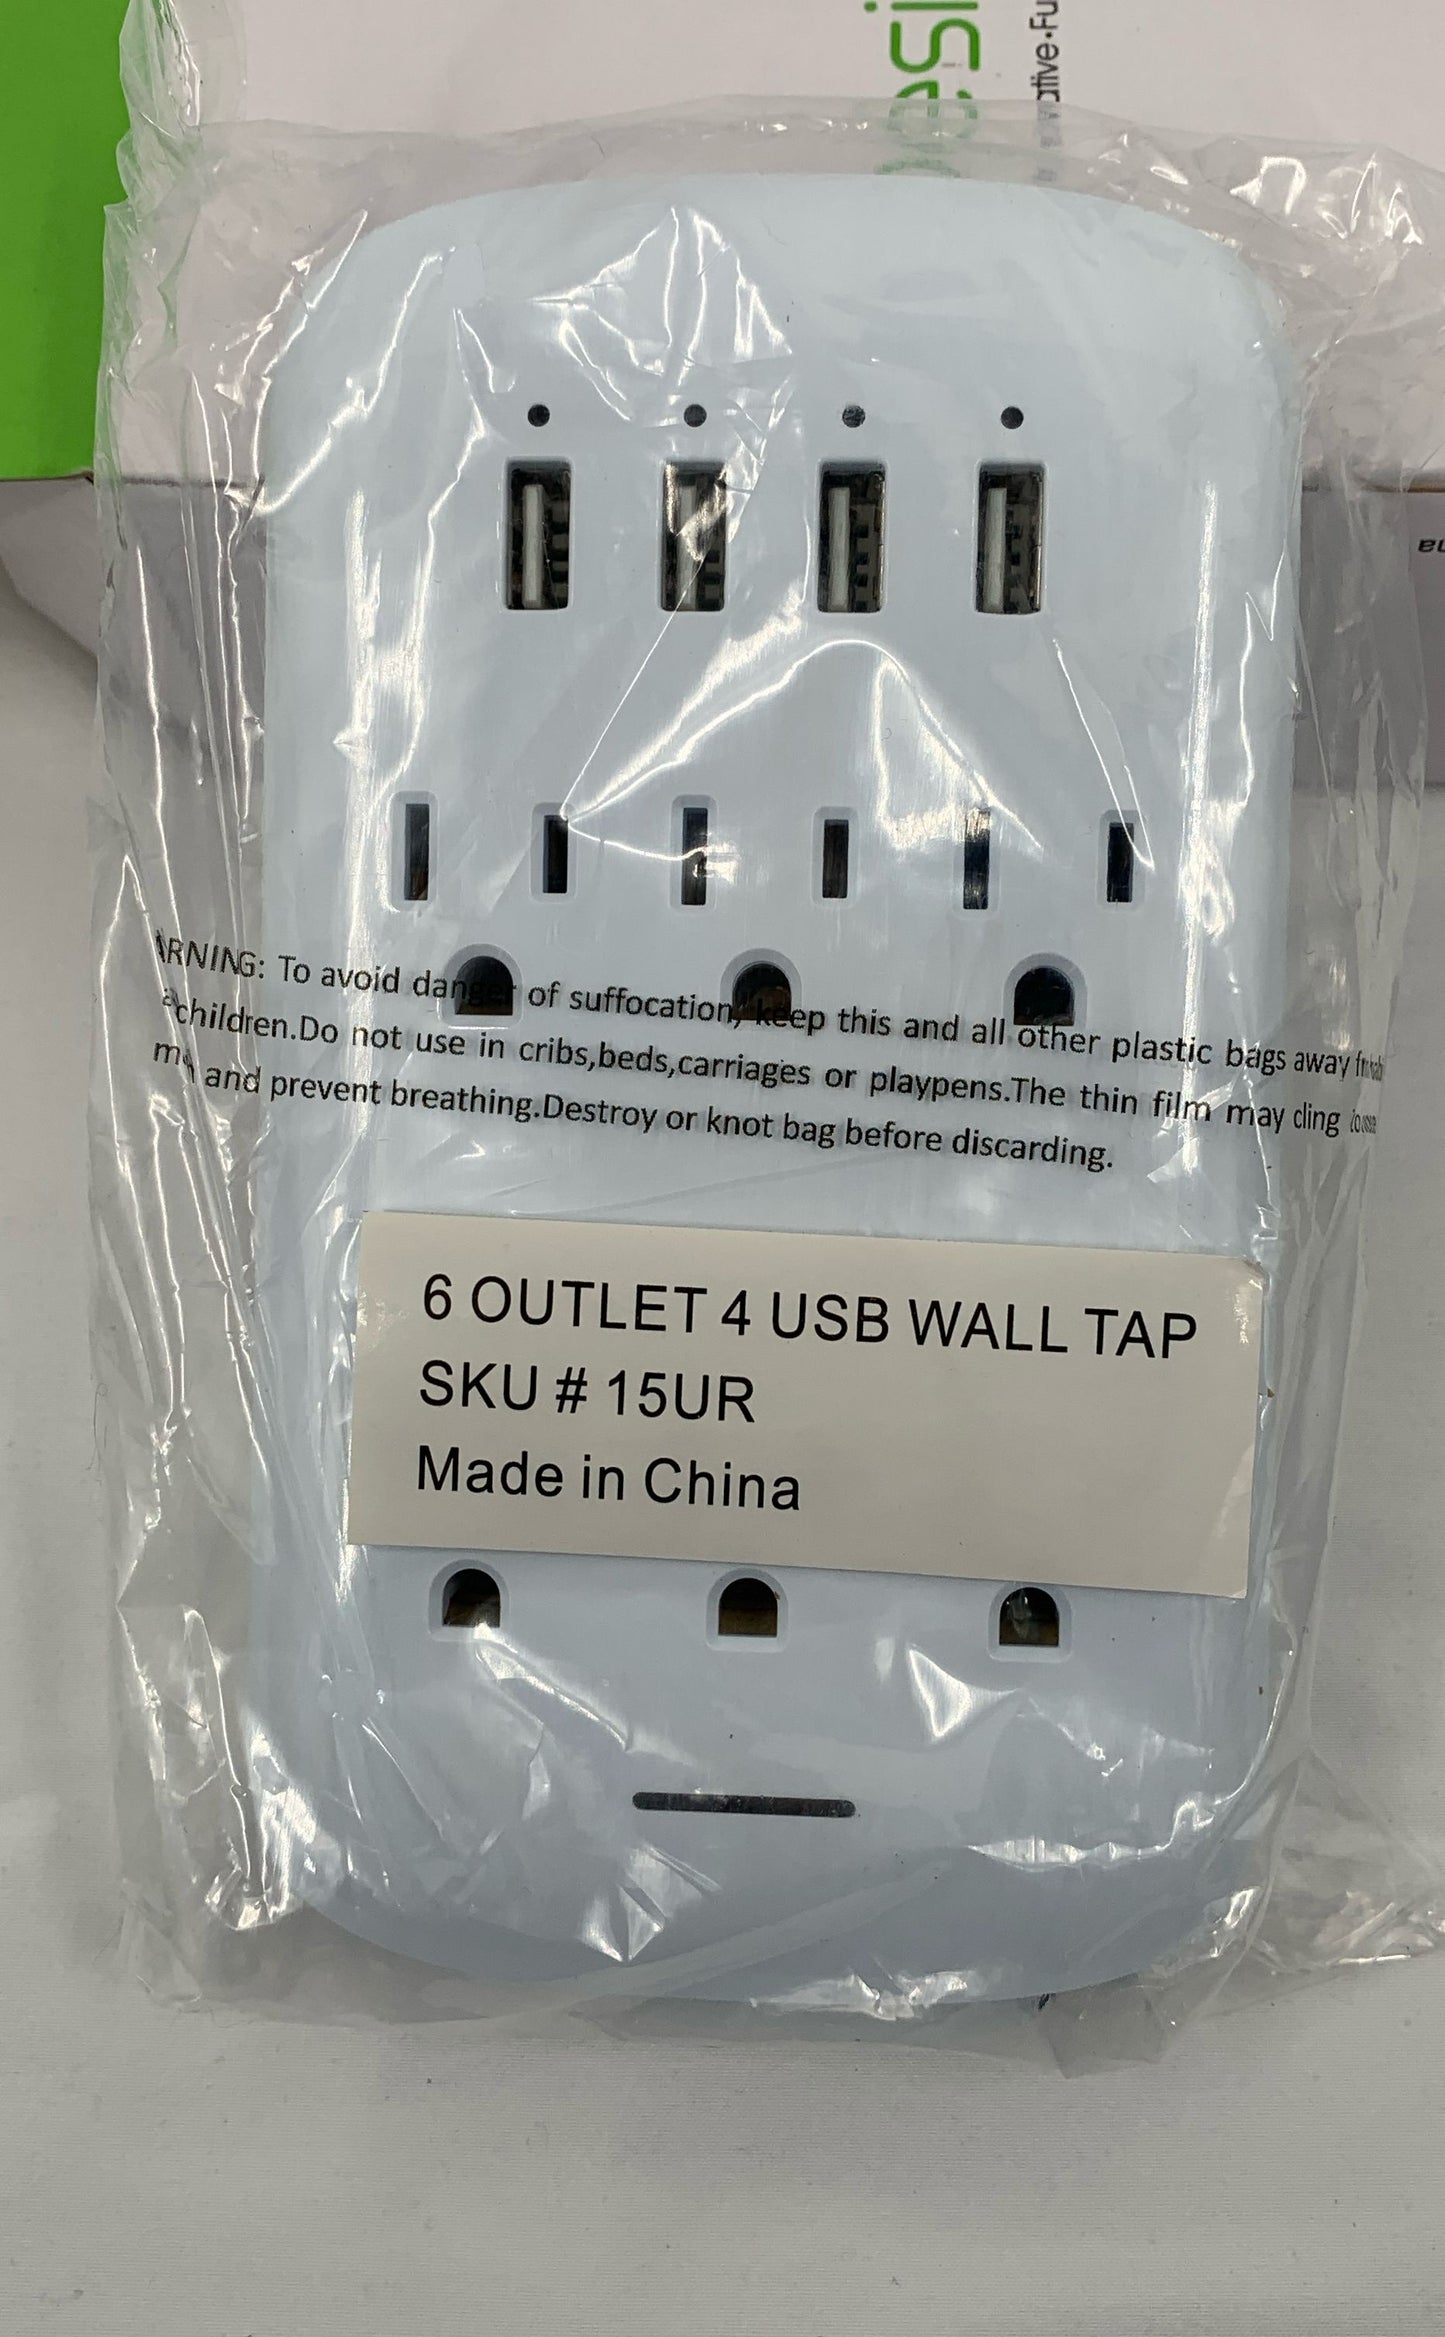 @ Design Litesun 6 Outlet 4 Usb Wall Tap With Surge Protector New In Box